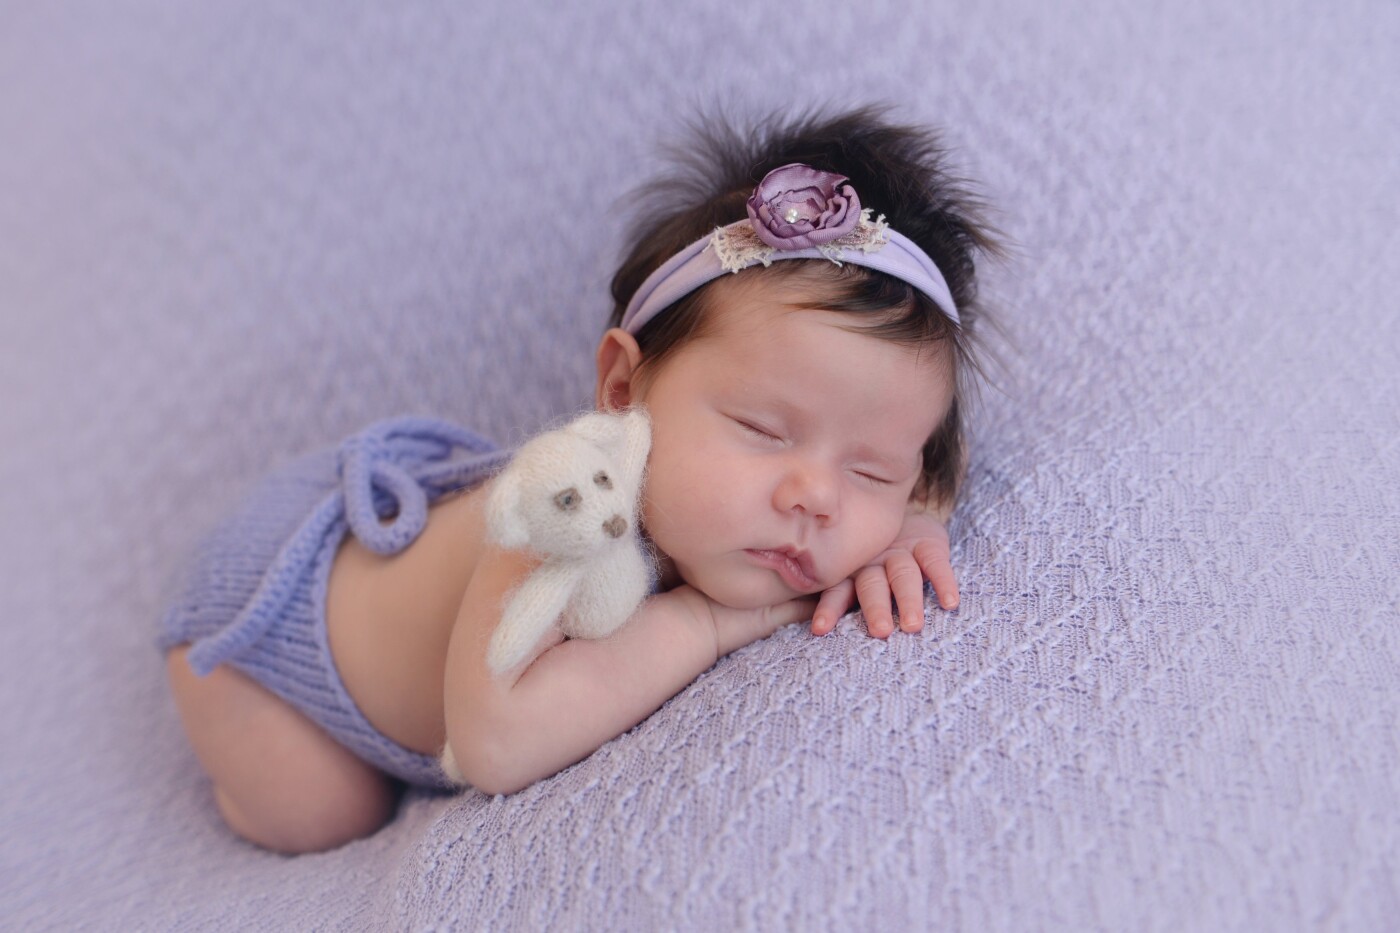 This lady is so gorgeous! She is half South-American and half Dutch and she has the best hair ever! At the time of the Newborn Shoot she was already 1 month old, but she slept the entire shoot. She looks absolutely stunning in purple, with her little bear-friend.